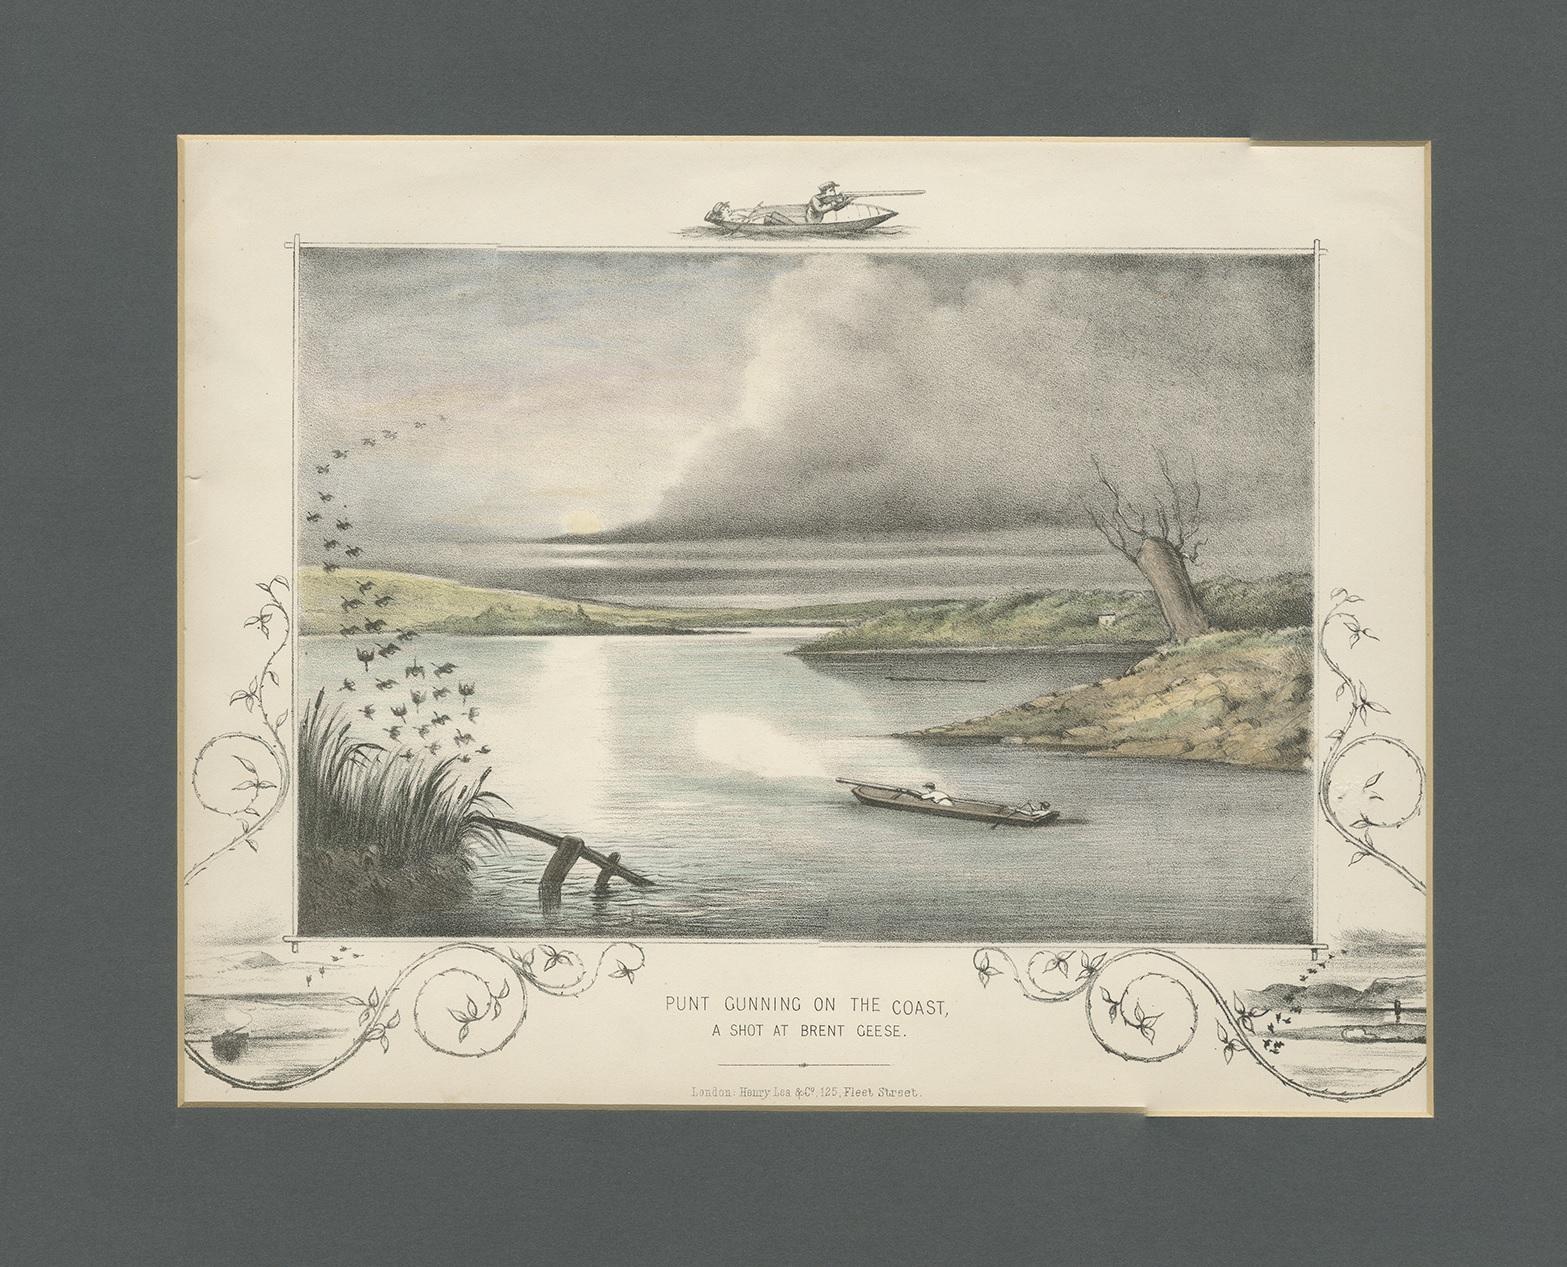 Antique print titled 'Punt gunning on the coast, a shot at Brent Geese'. Published by Henry Lea & Co, London. This print includes a passe partout. Please note that the crooked passe partout lines are caused by the scanner and are not visible on the